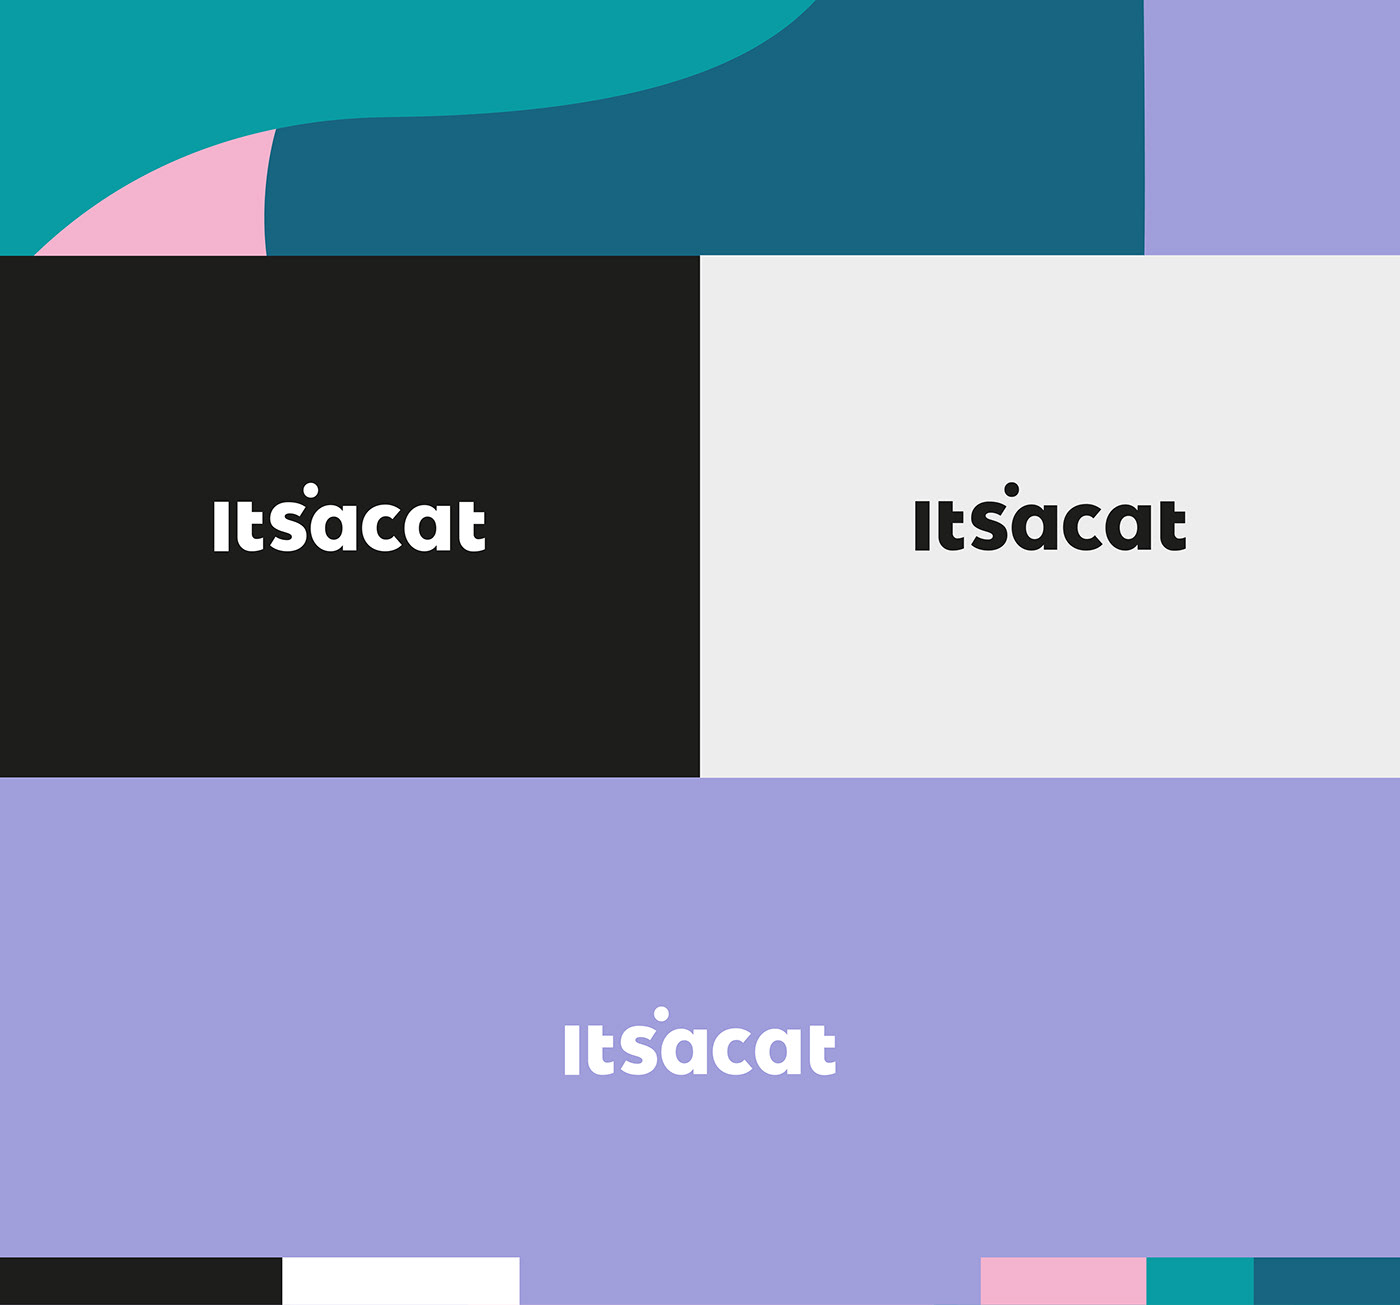 branding  2D itsacat logo identity wood 3D business card graphic typography  